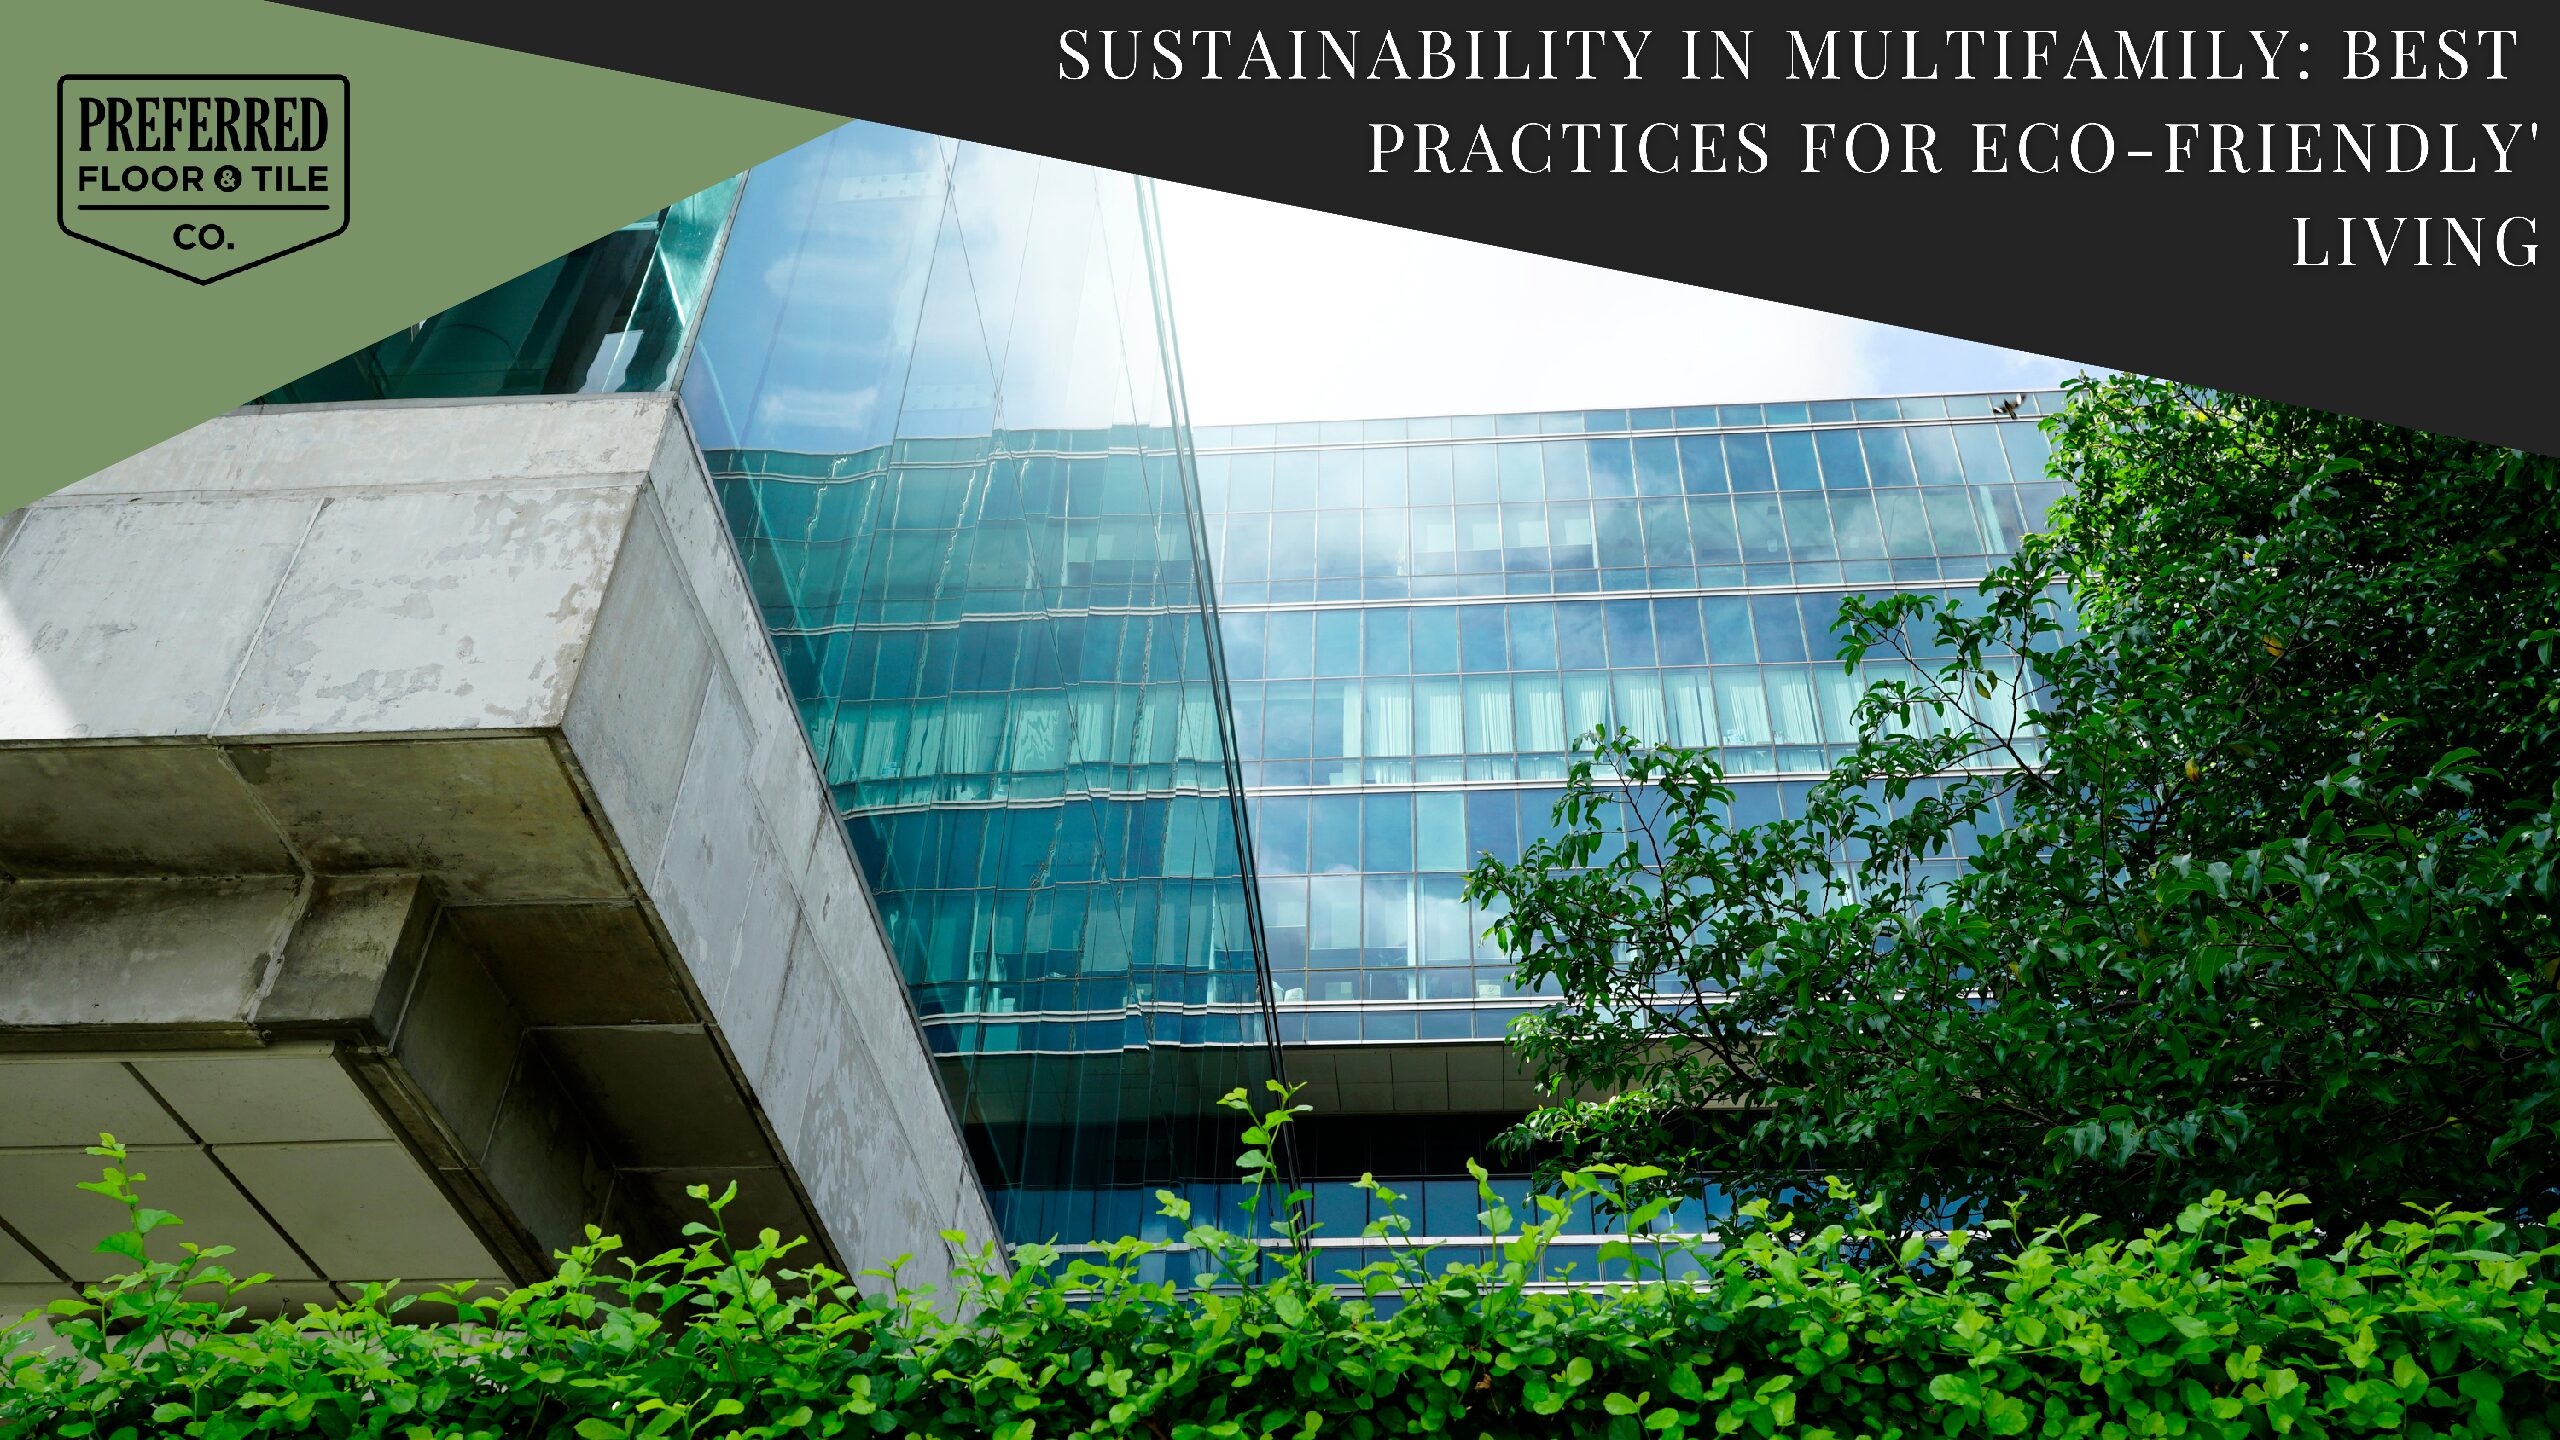 Sustainability in Multifamily: Best Practices for Eco-Friendly Living